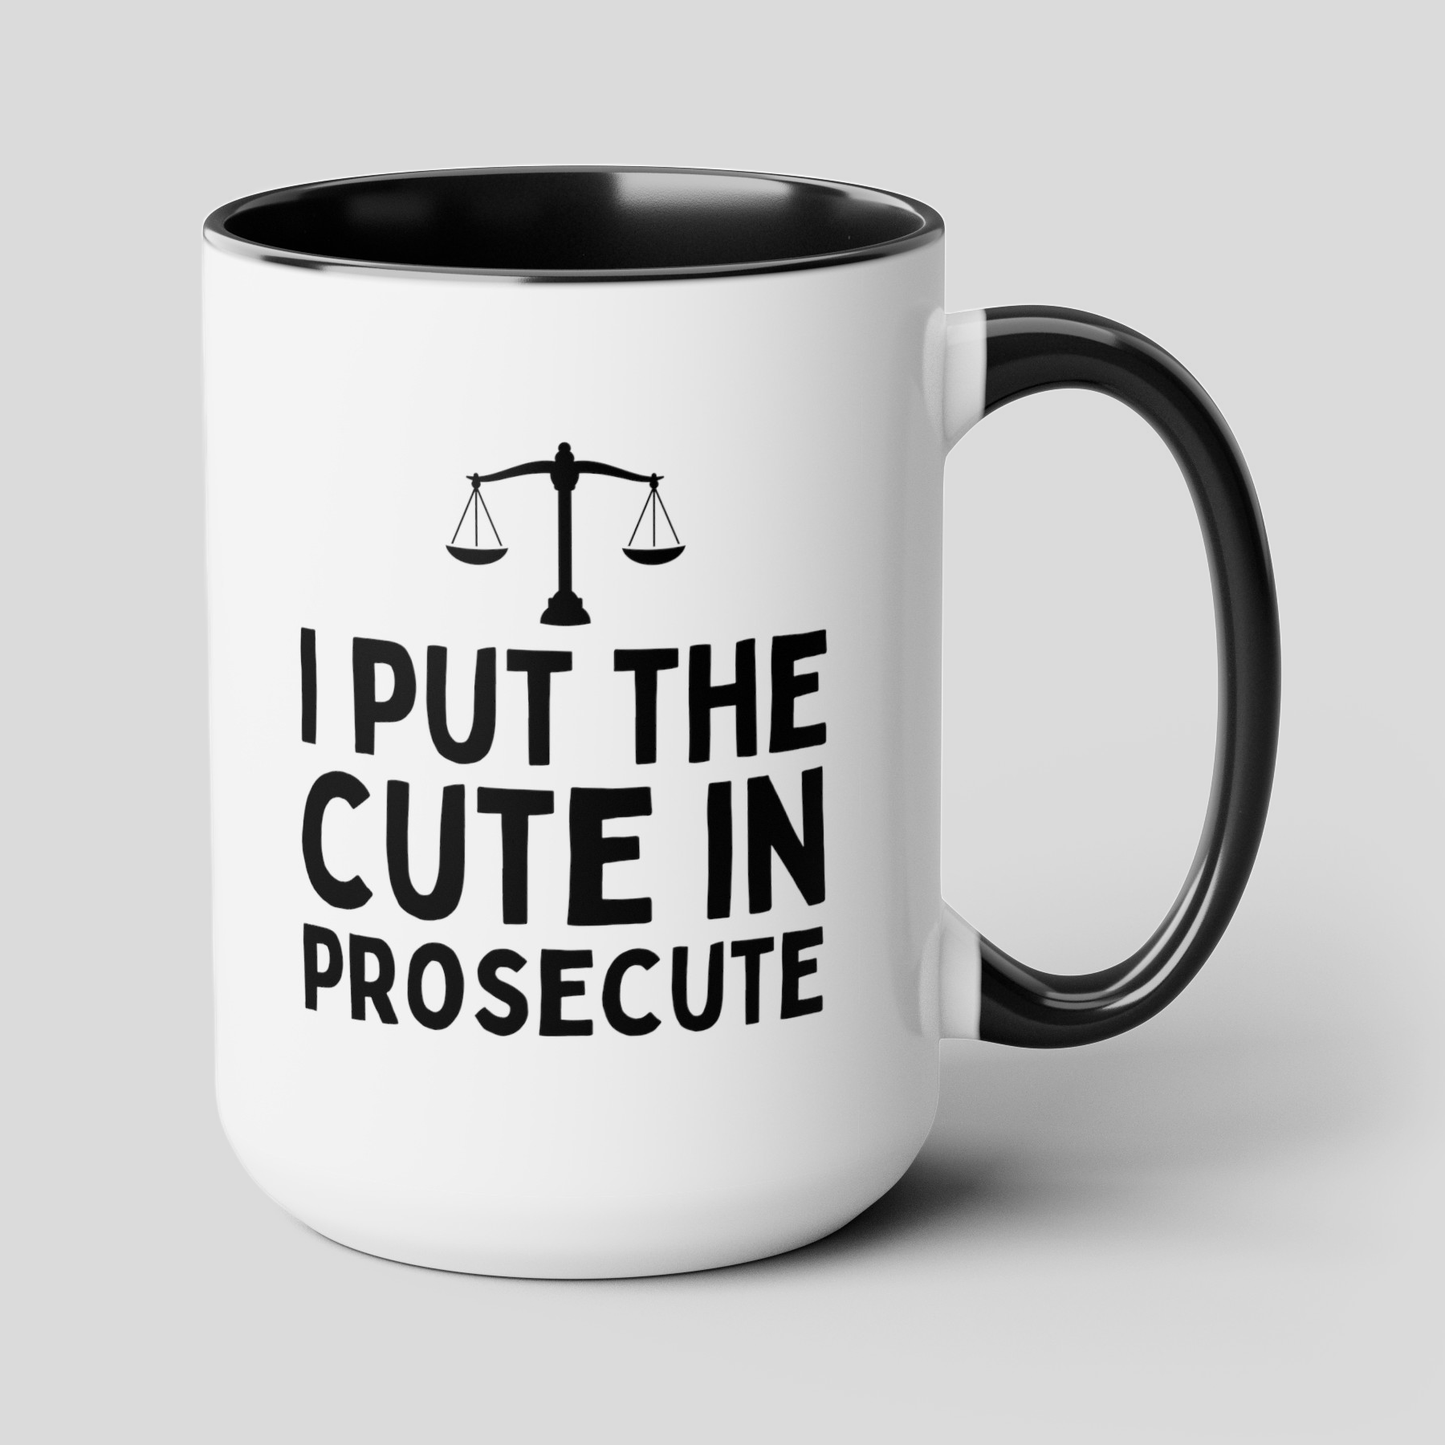 I Put The Cute In Prosecute 15oz white with black accent funny large coffee mug gift for lawyer law school graduation student legal prosecutor girlfriend boyfriend barrister novelty waveywares wavey wares wavywares wavy wares cover